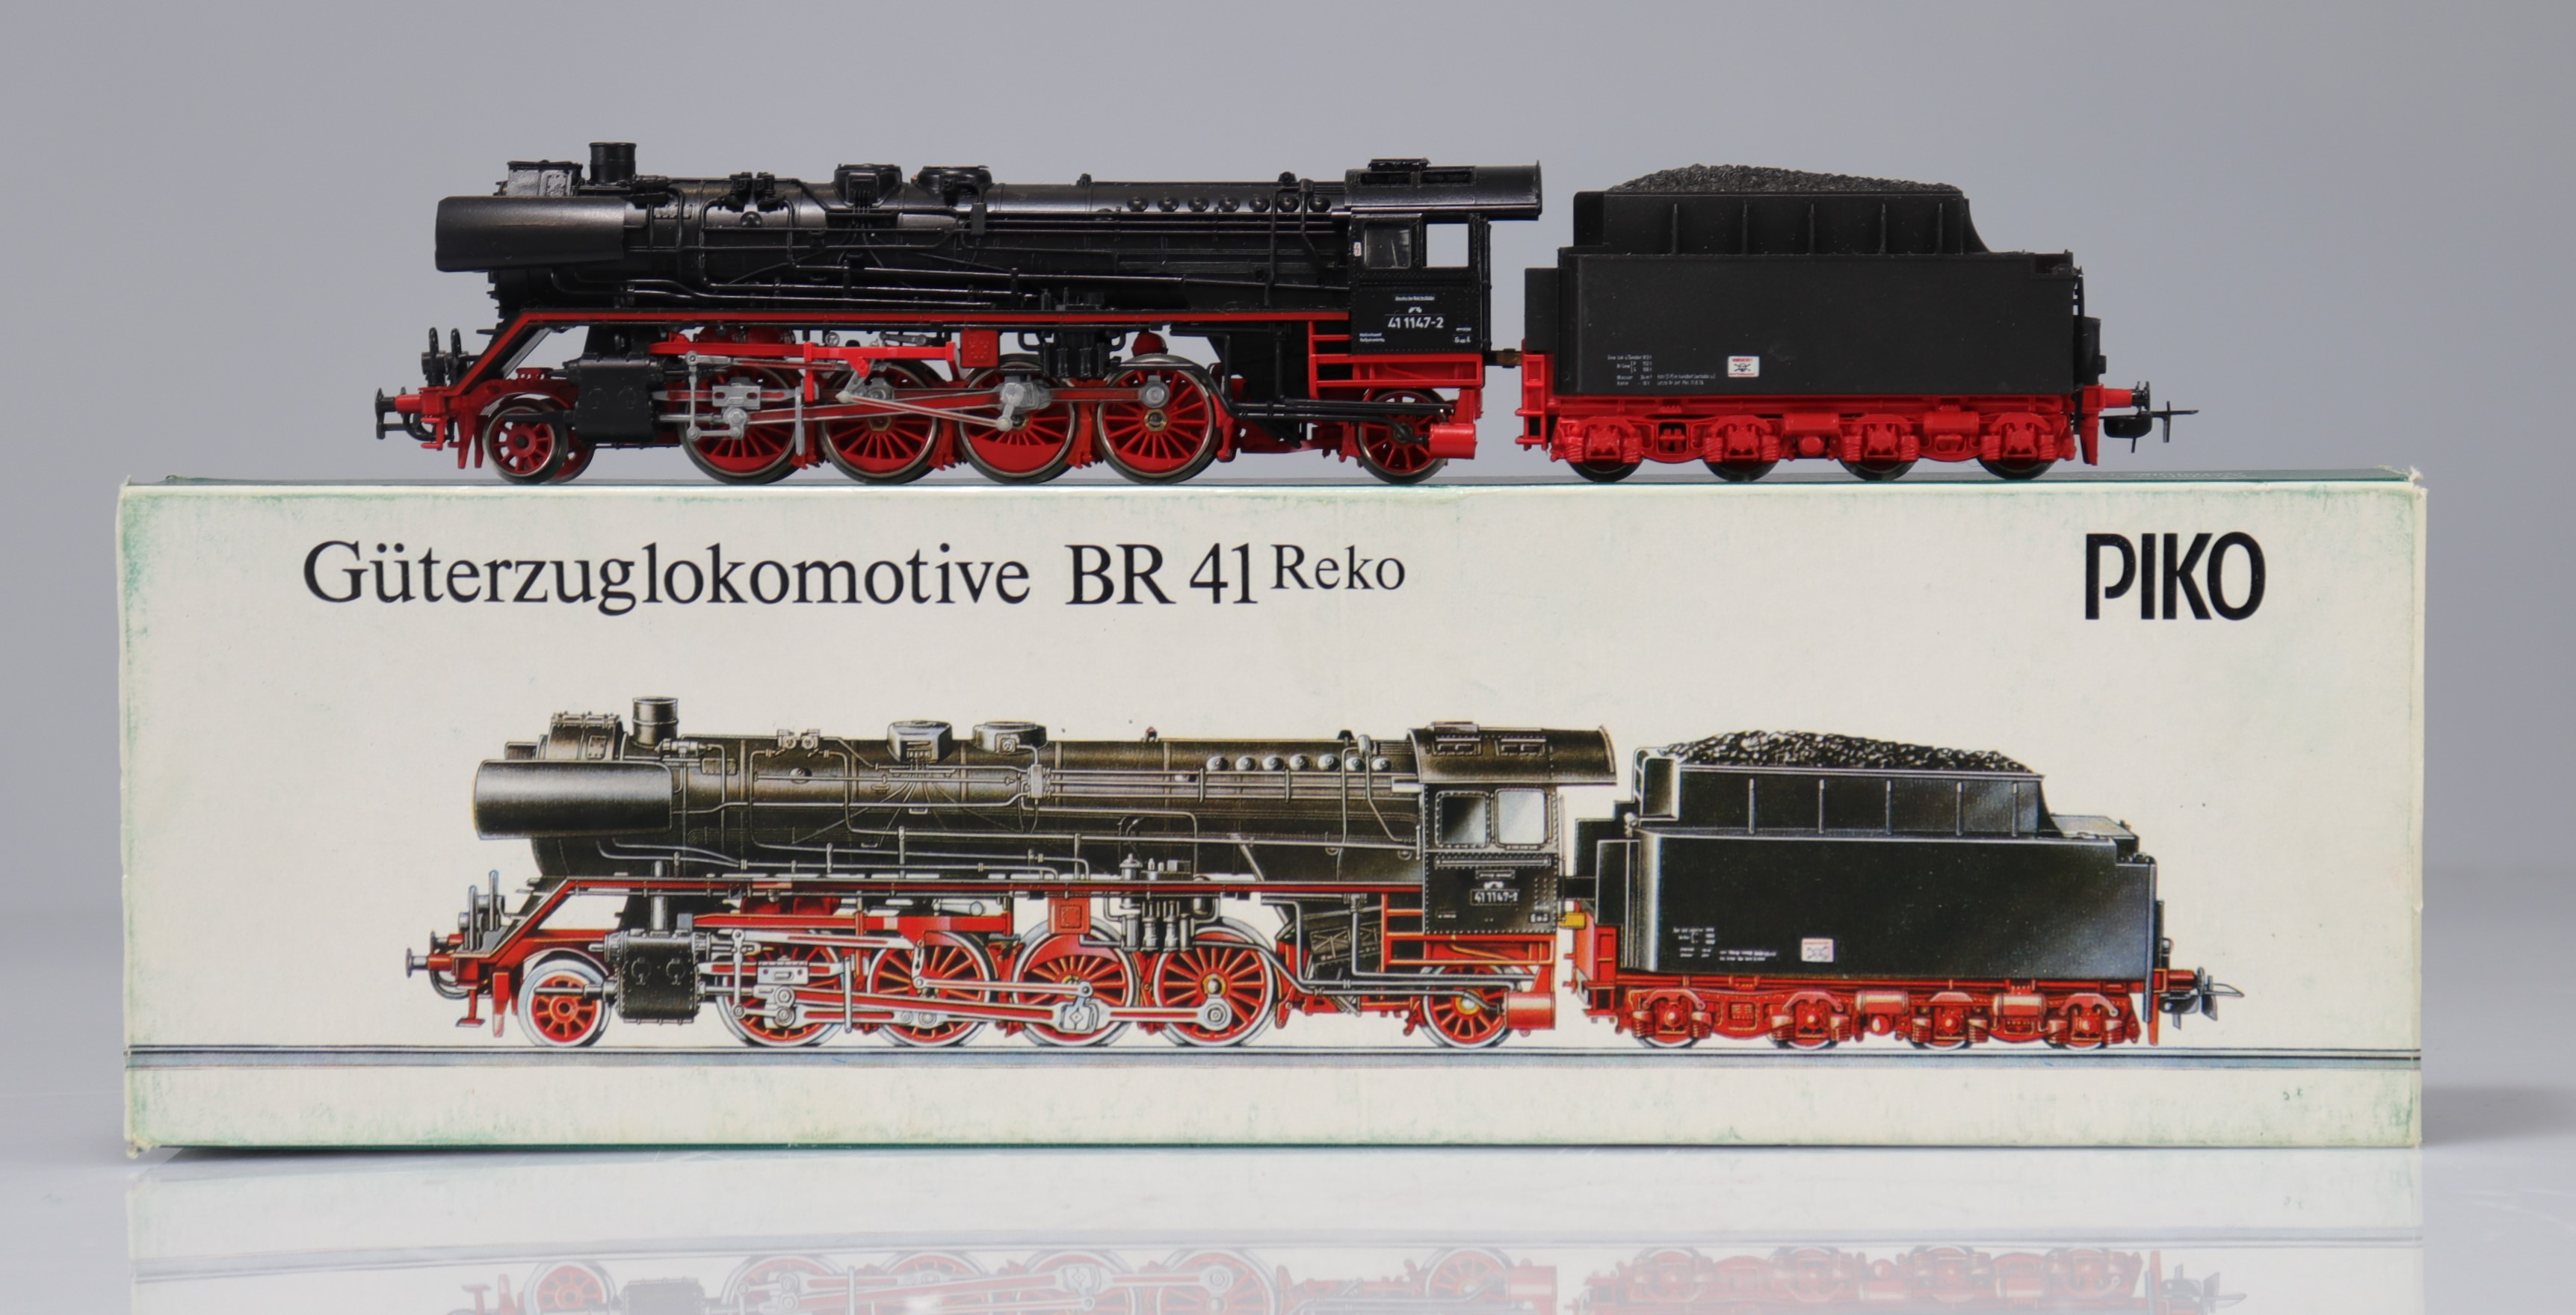 Piko locomotive / Reference: 05 6326 / Type: BR41 411147-2